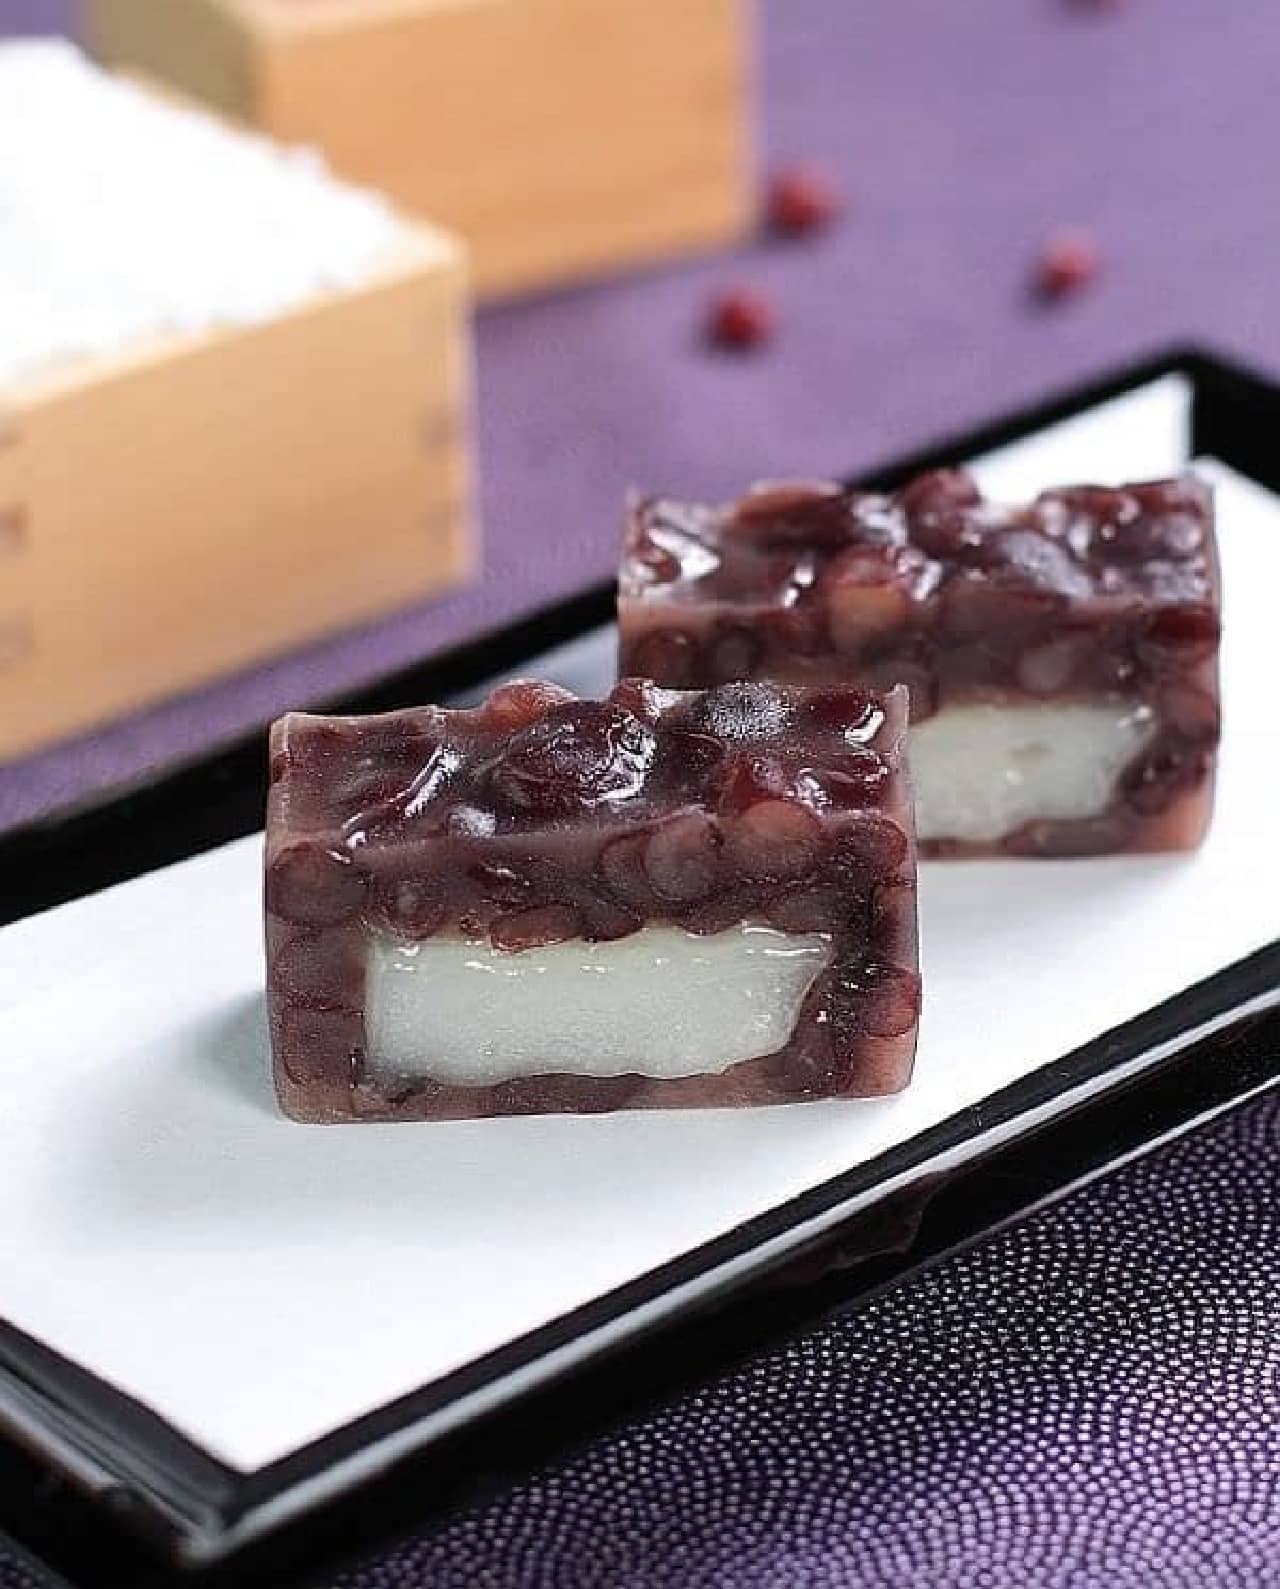 Traditional confectionery is now available in "salt taste"! The saltiness and sweetness of azuki beans are exquisite